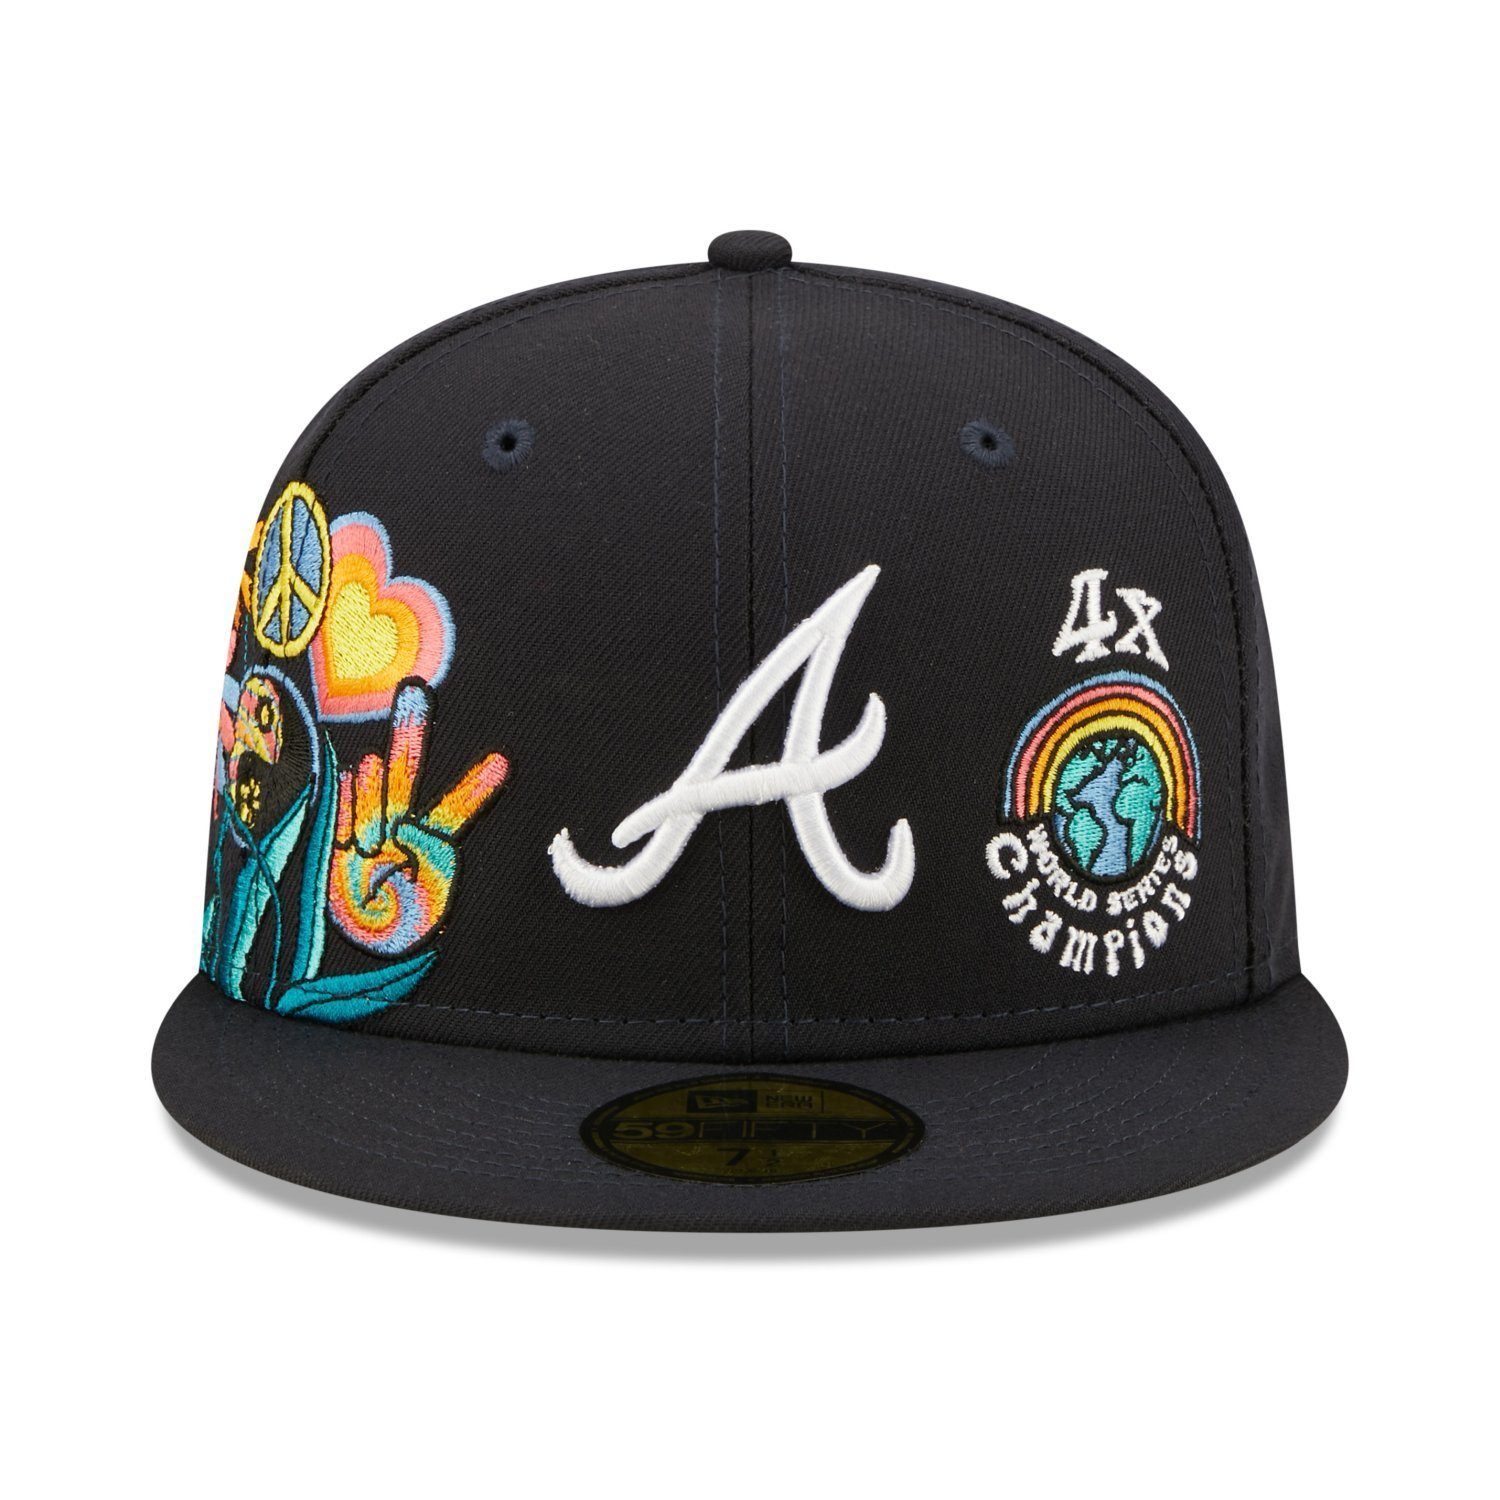 New Era Fitted 59Fifty Atlanta GROOVY Cap Braves